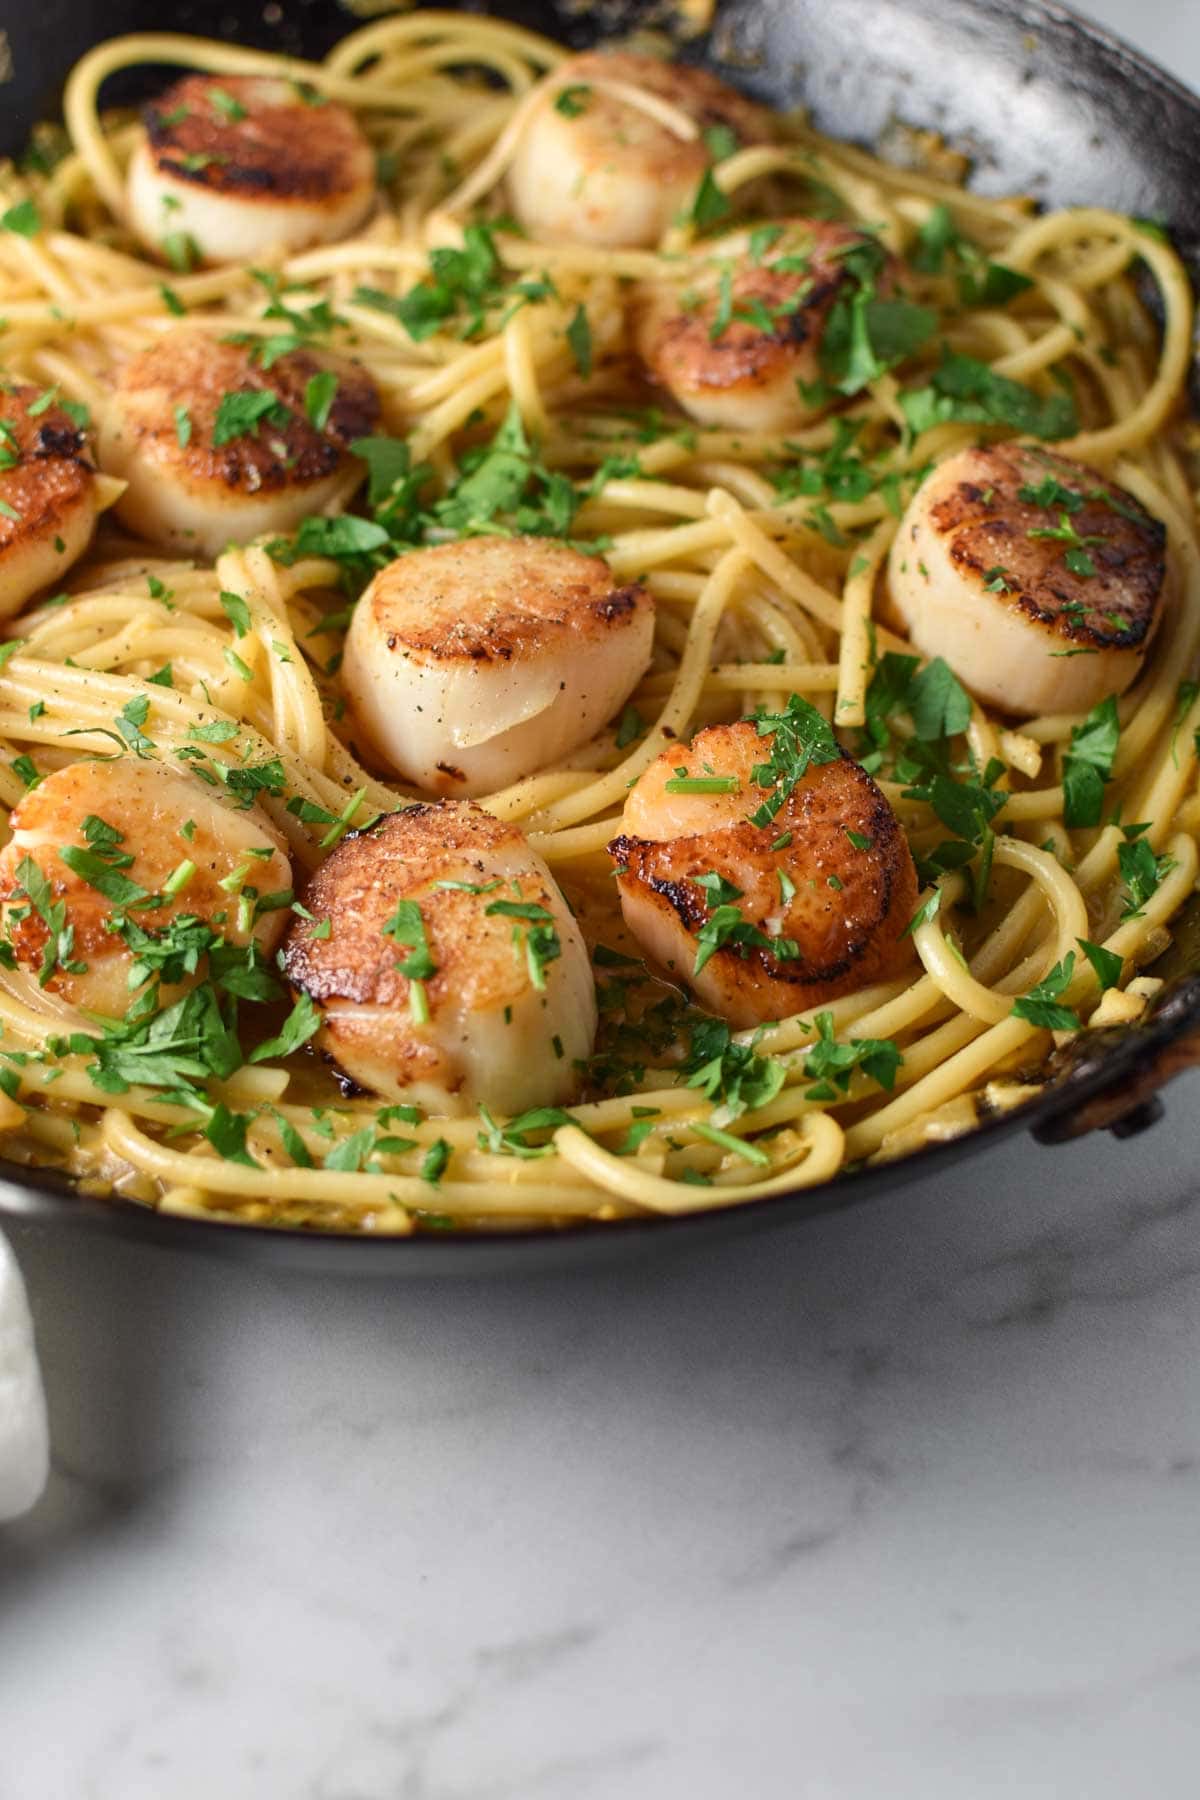 An image showing details of scallops topped with parsley on a creamy pasta.